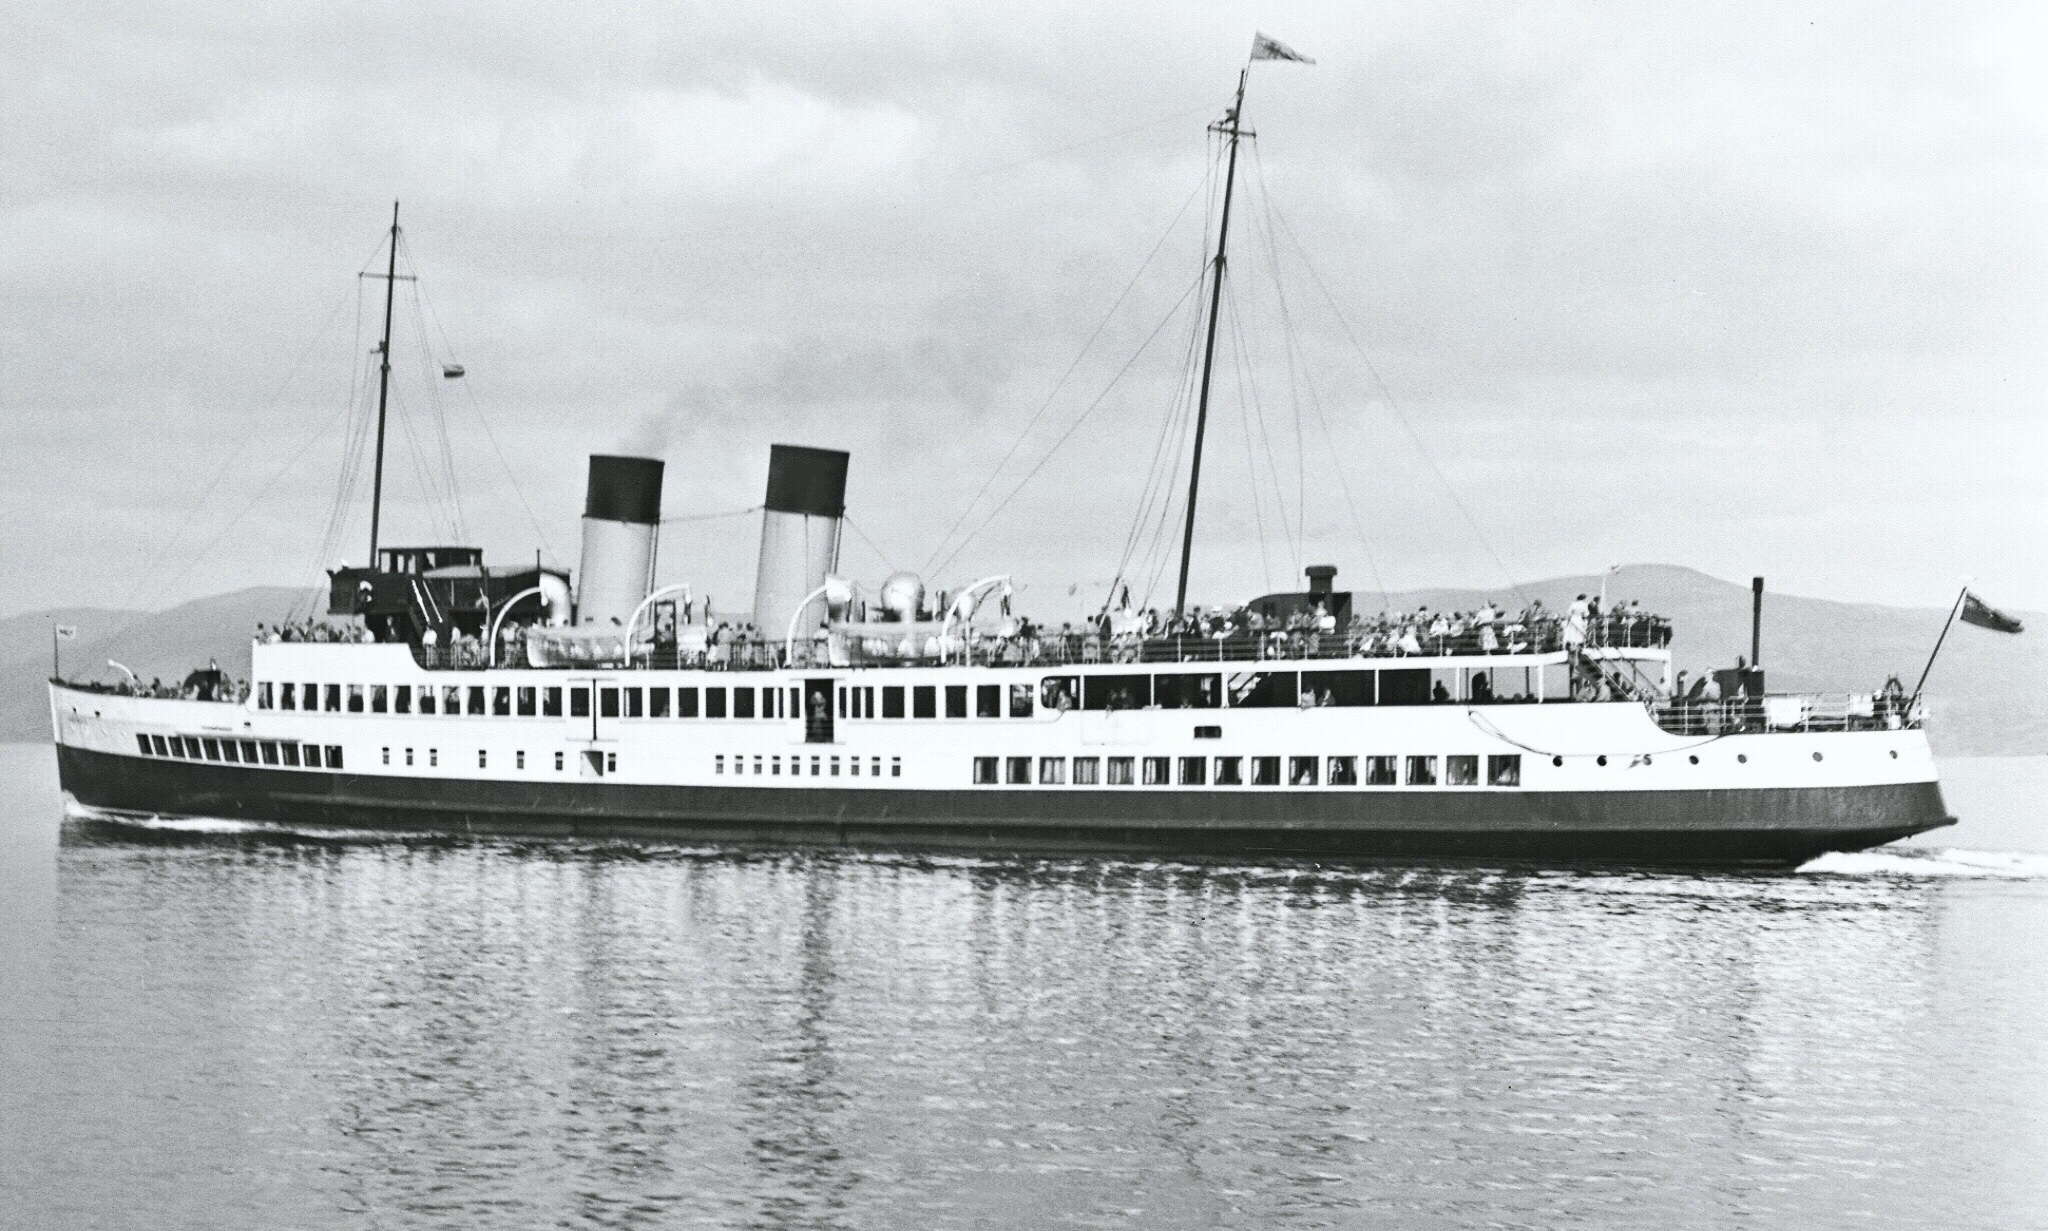 Govan housing associations hail plans for iconic steamer TS Queen Mary to sail again